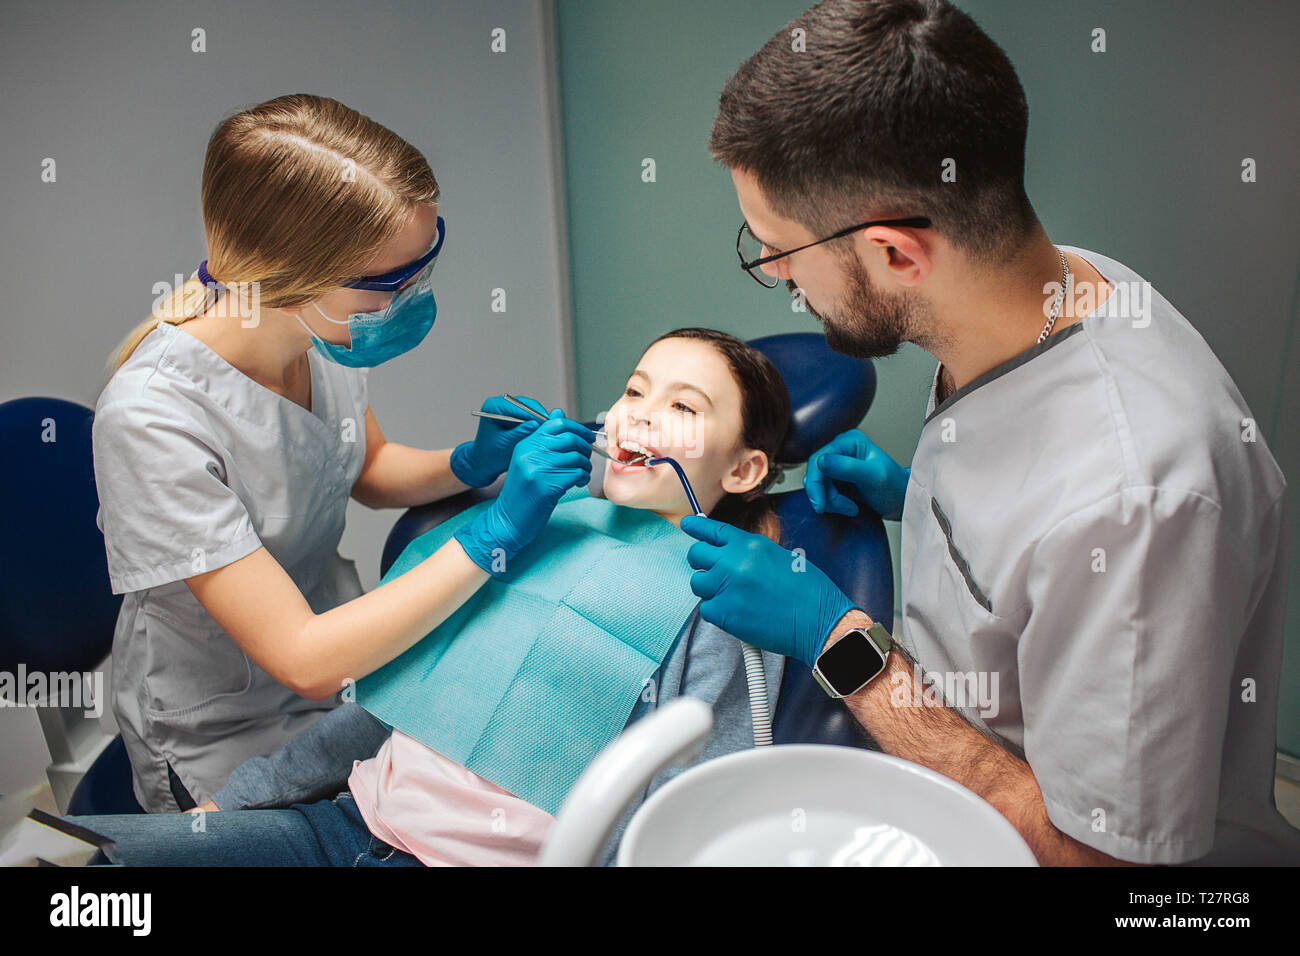 Female dentist check up girl's teeth. Male helper stad beside. Girl sit in dental chair in room. She keep mouth opened Stock Photo